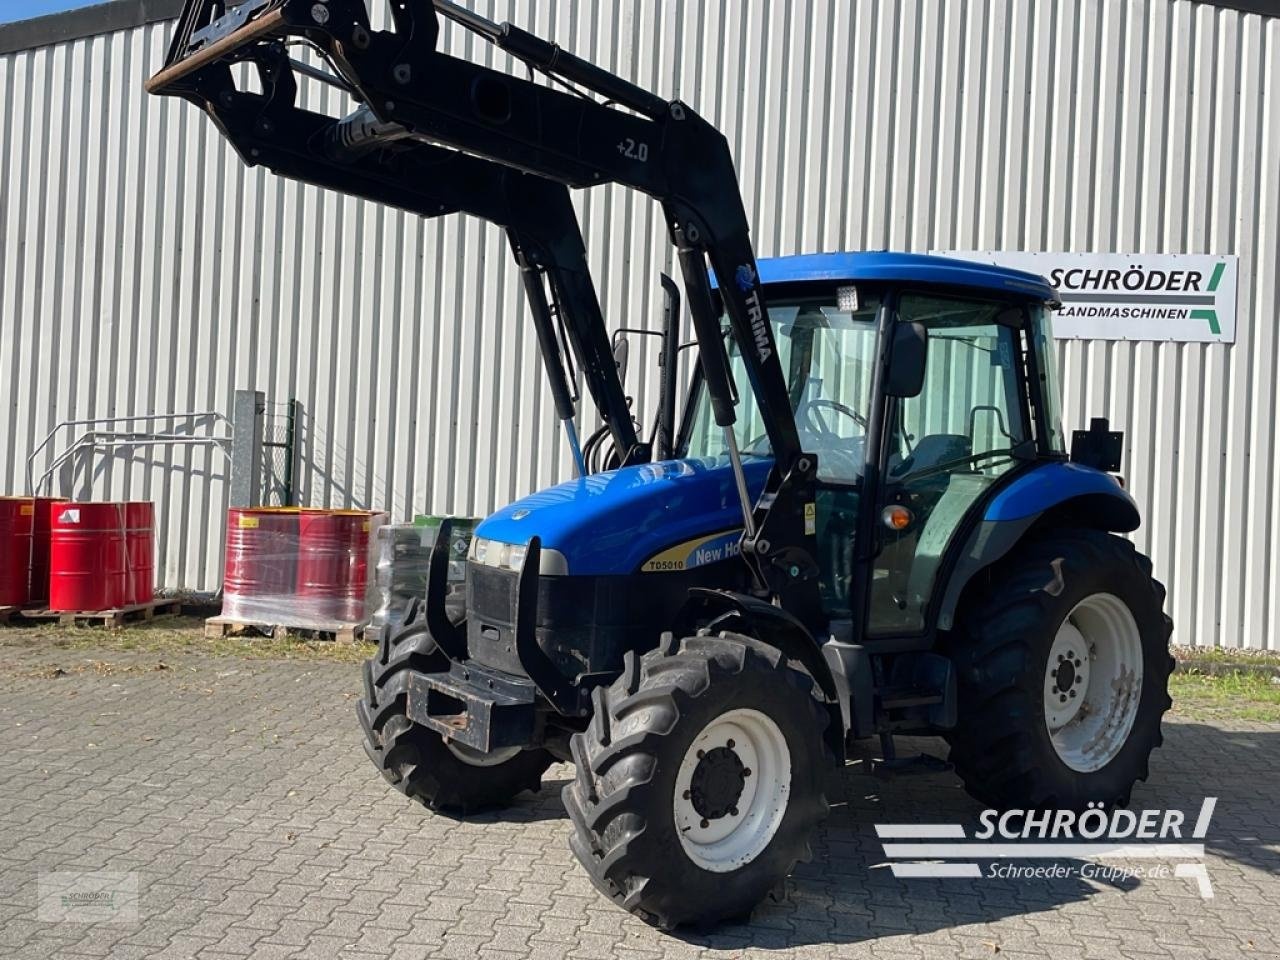 New Holland TD 5010 tractor €27,850